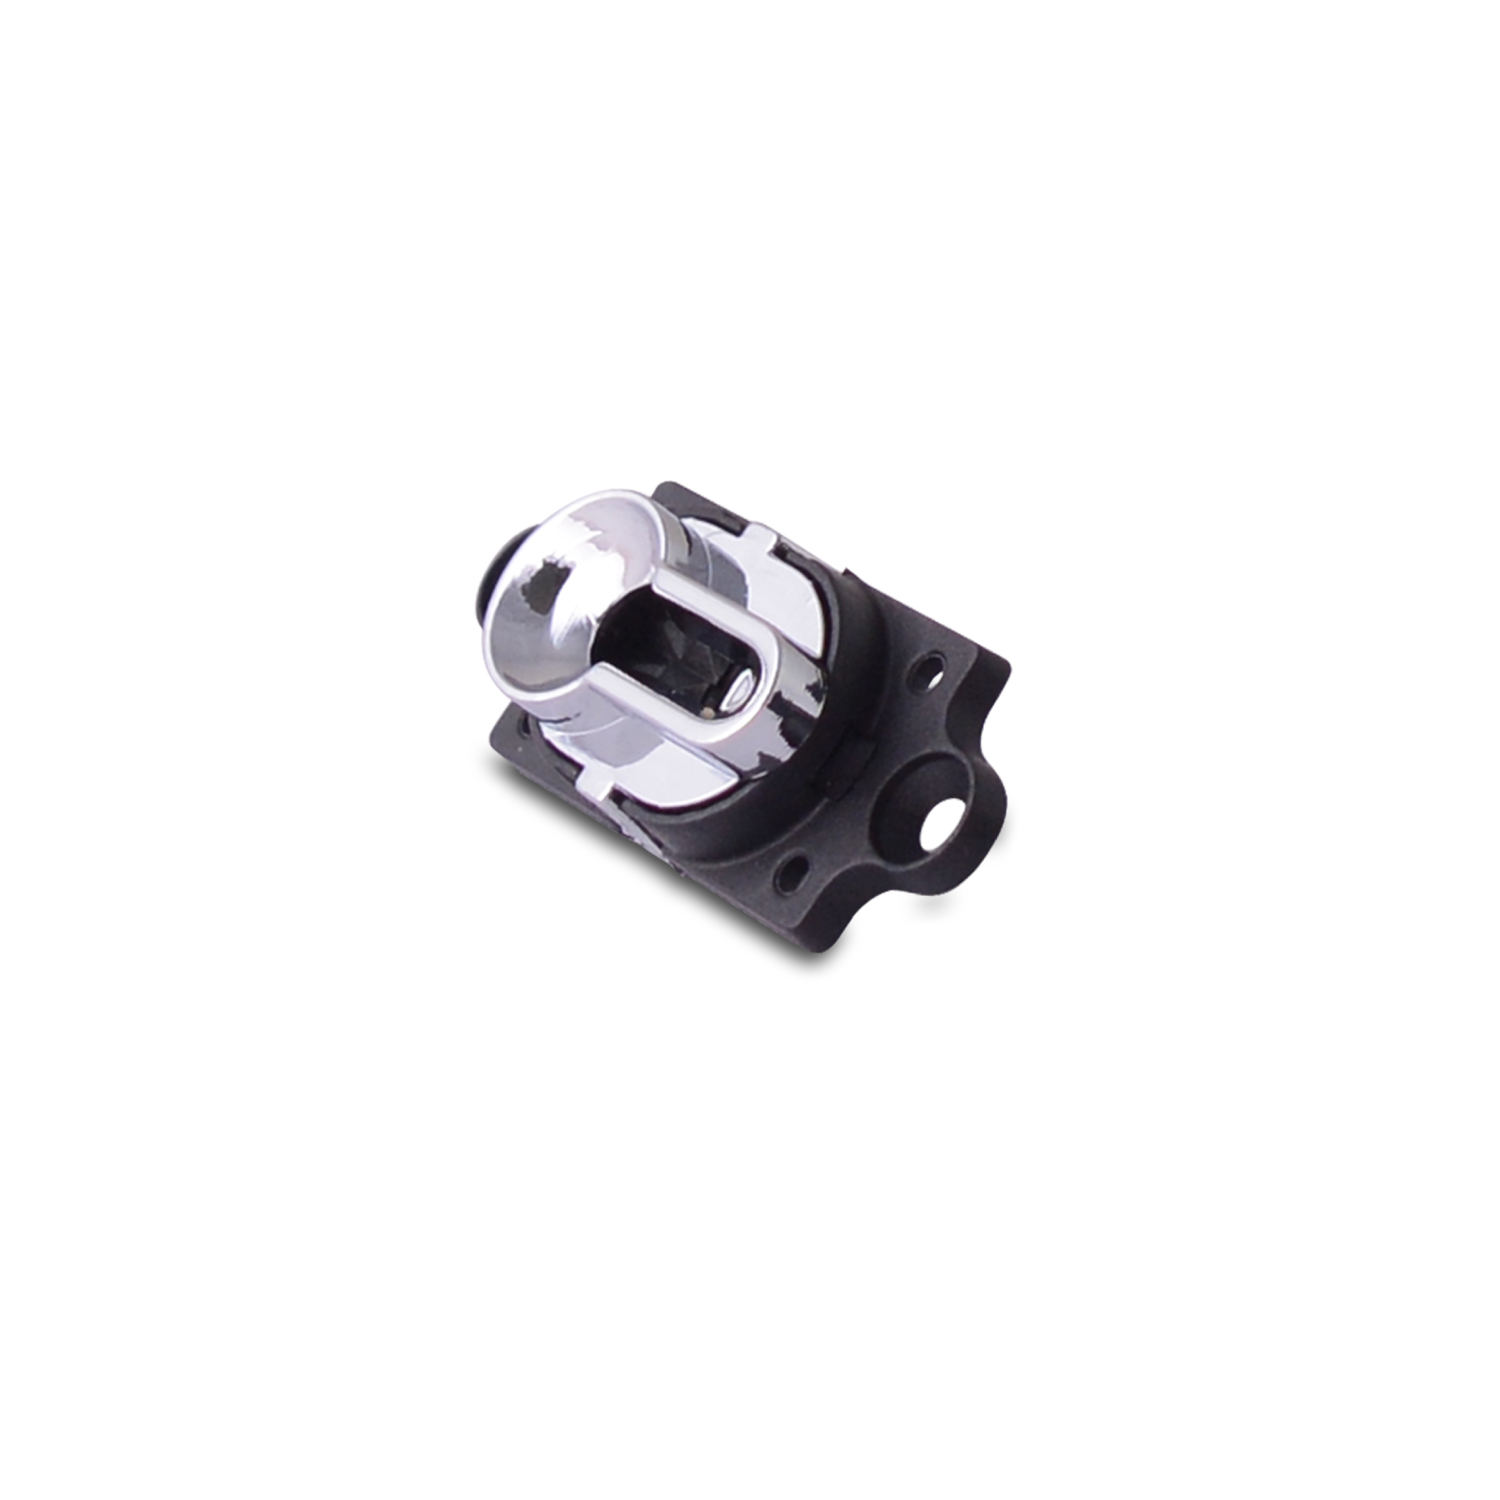 Handle Adapter to suit the Balmoral and Vectis Plus Door Locks